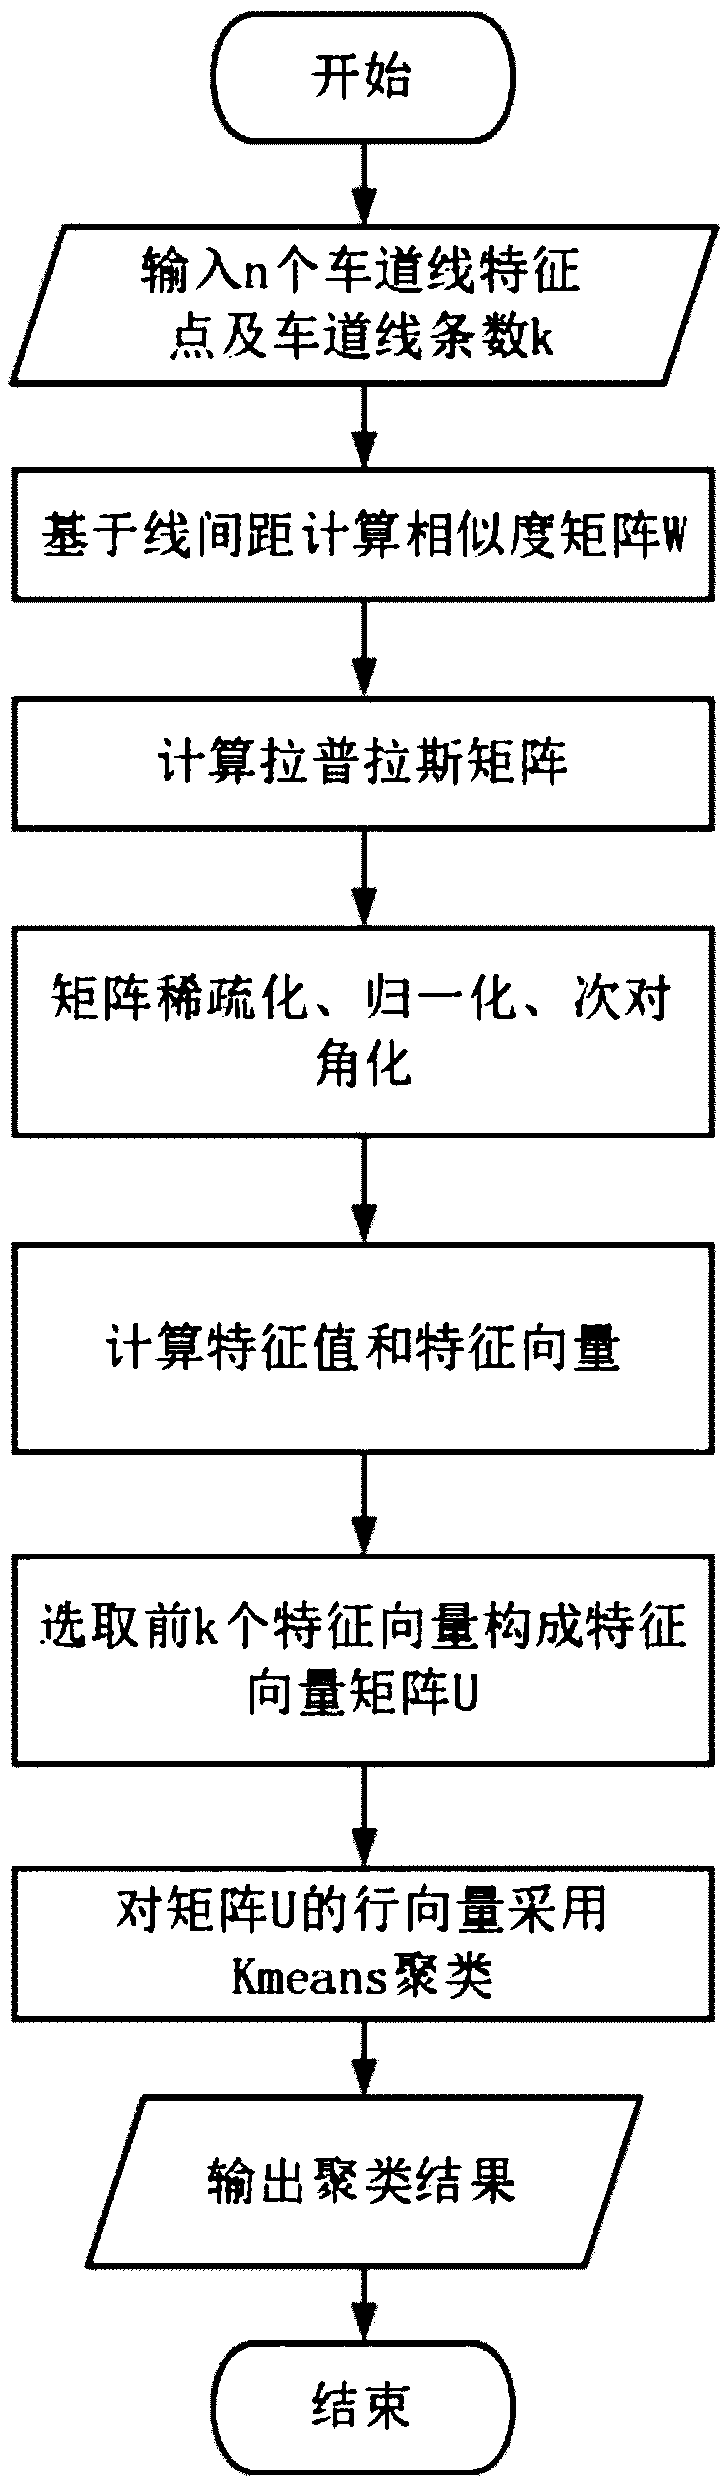 Aerial video highway lane line detection method based on line spacing characteristic point clustering